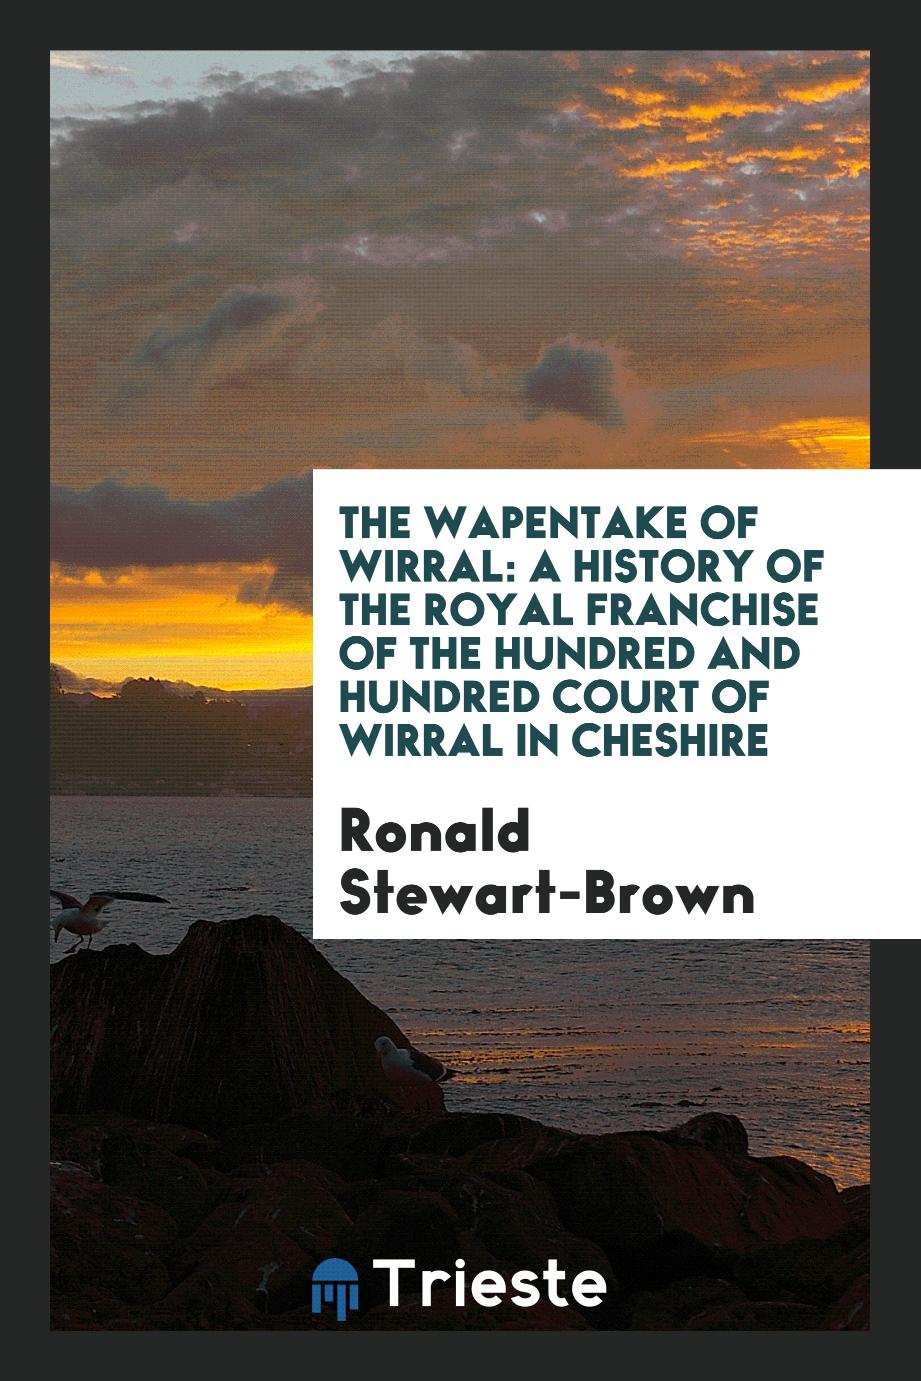 The Wapentake of Wirral: A History of the Royal Franchise of the Hundred and Hundred Court of Wirral in Cheshire